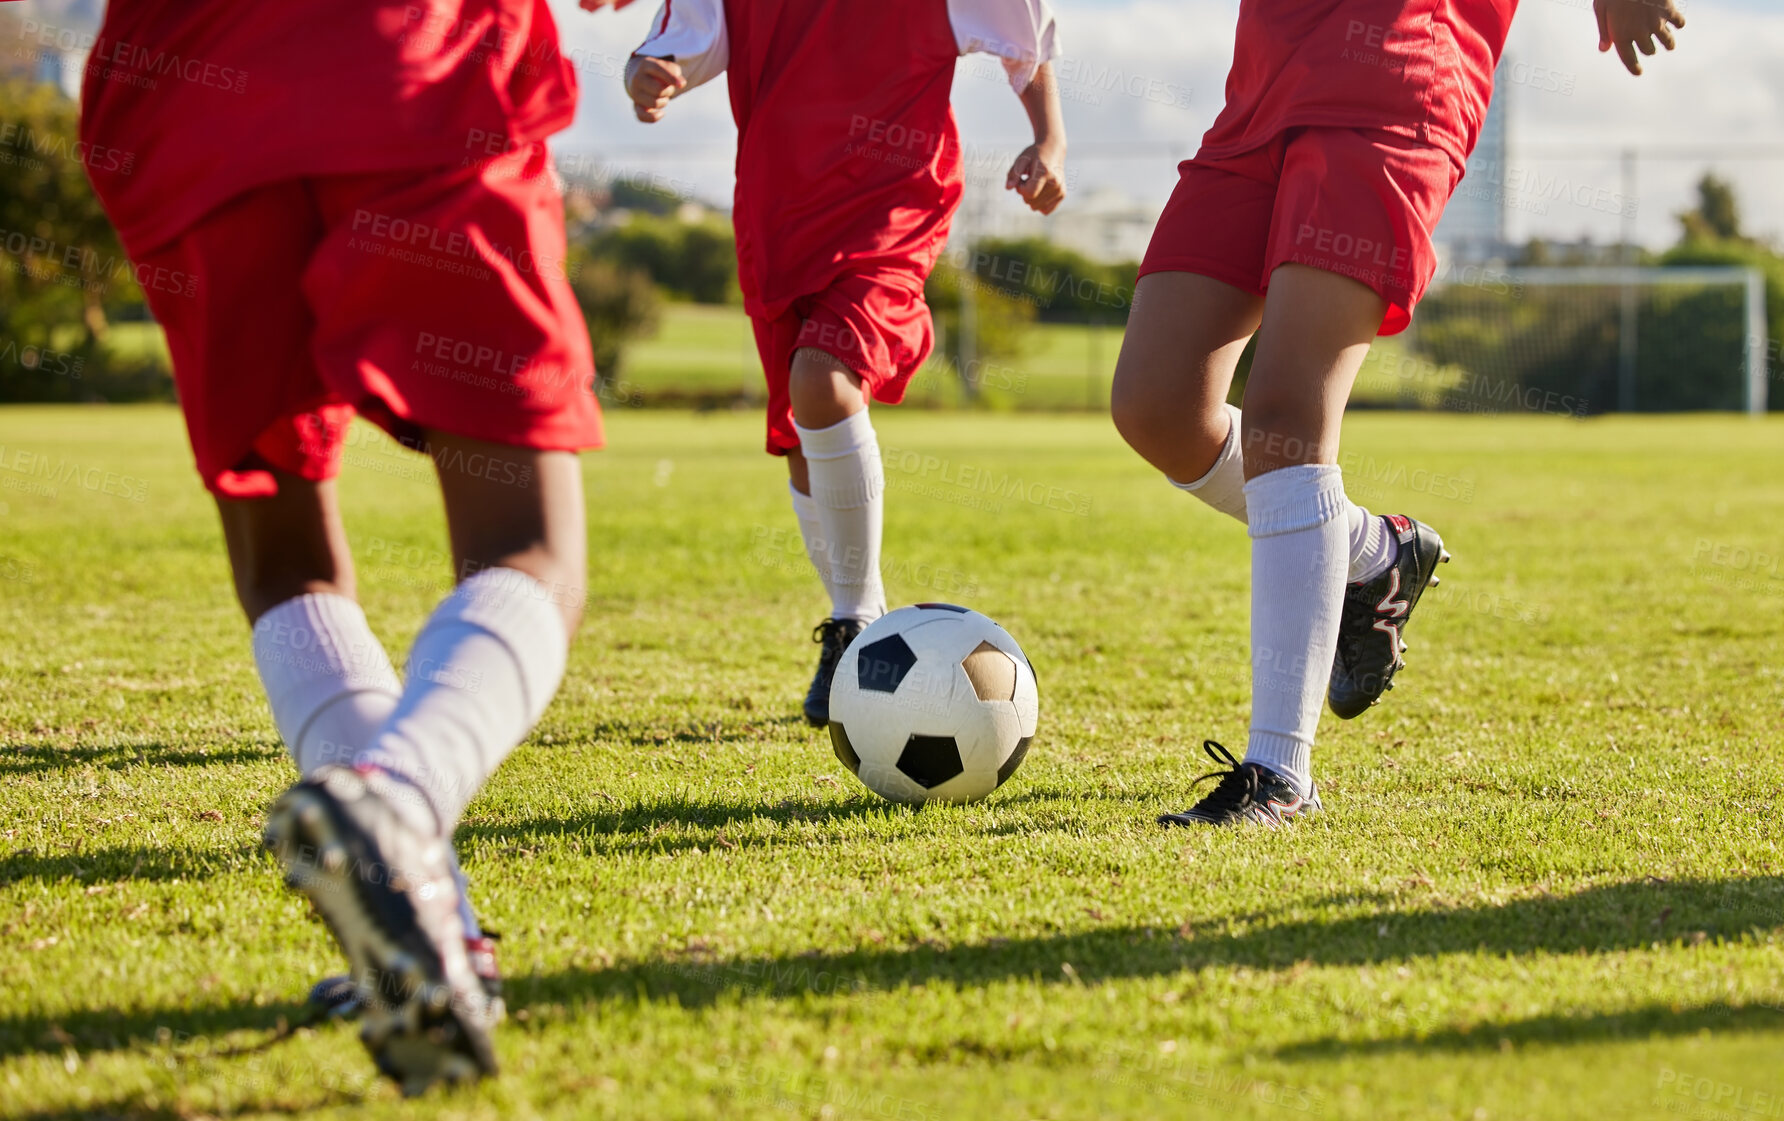 Buy stock photo Kids team, soccer or legs with soccer ball in workout, fitness game or exercise on nature park grass, high school stadium or field. Football or sports training with energy in health or girls wellness